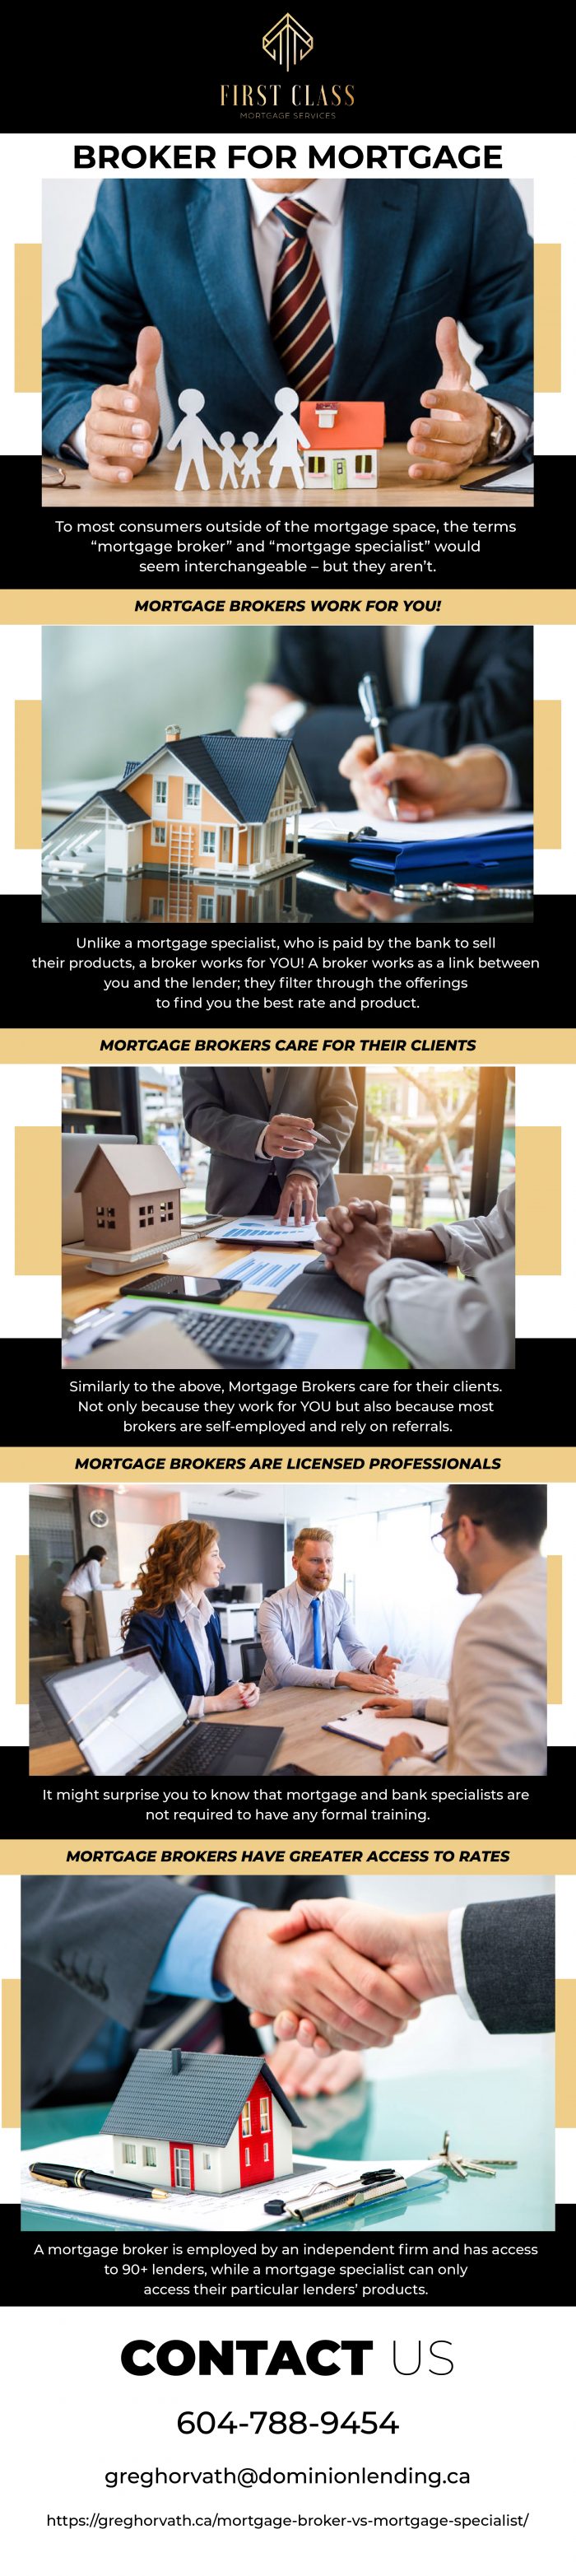 Here’s The Broker For Mortgage- FIRST CLASS